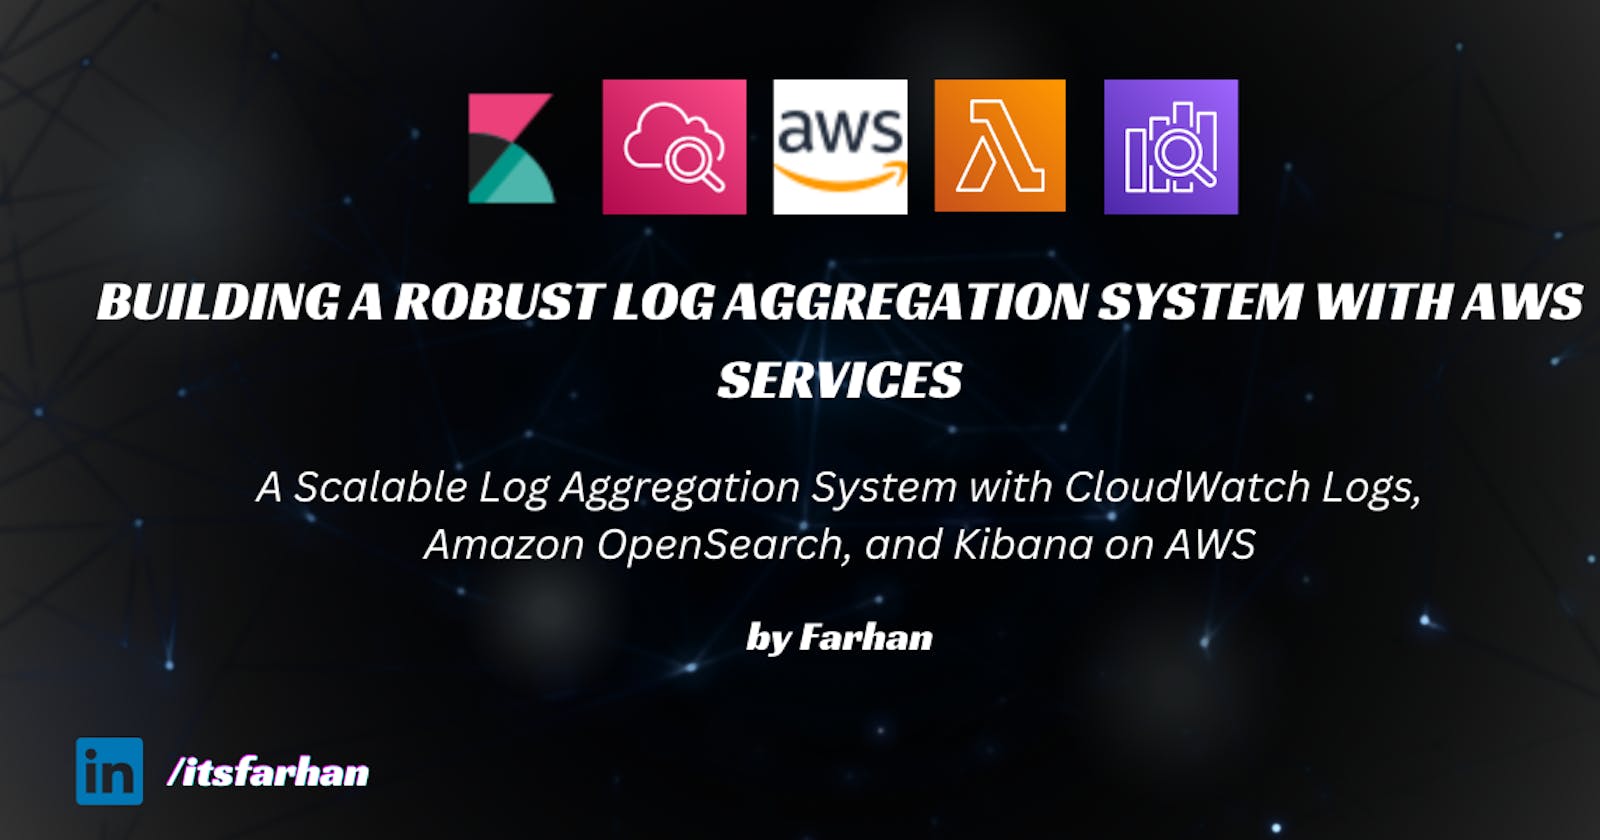 Building a Scalable Log Aggregation System with CloudWatch Logs, Amazon OpenSearch, and Kibana on AWS